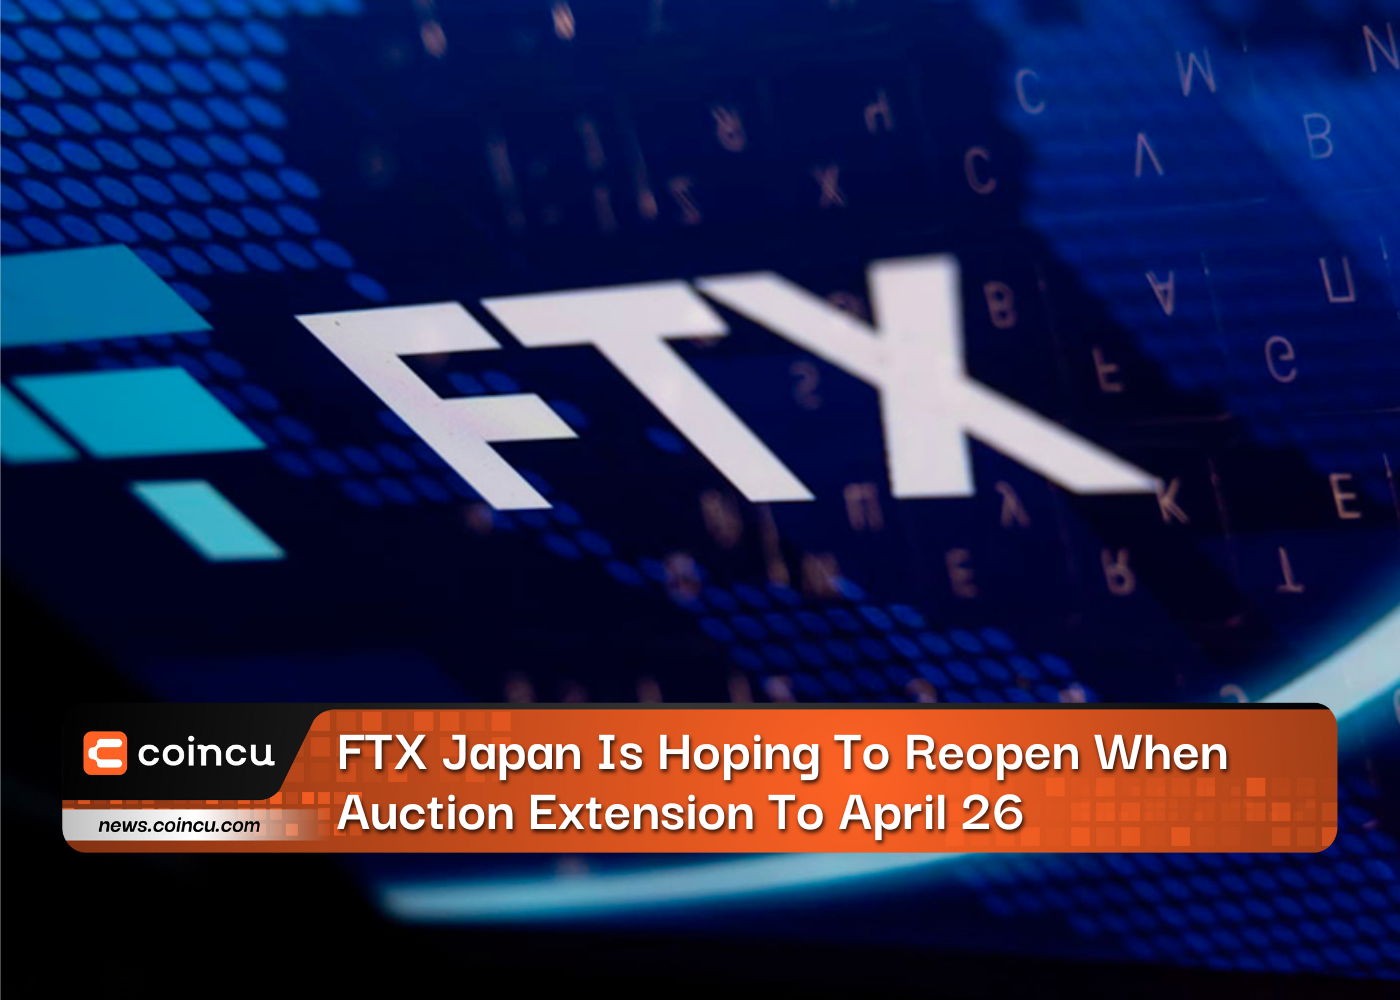 FTX Japan Is Hoping To Reopen When Auction Extension To April 26